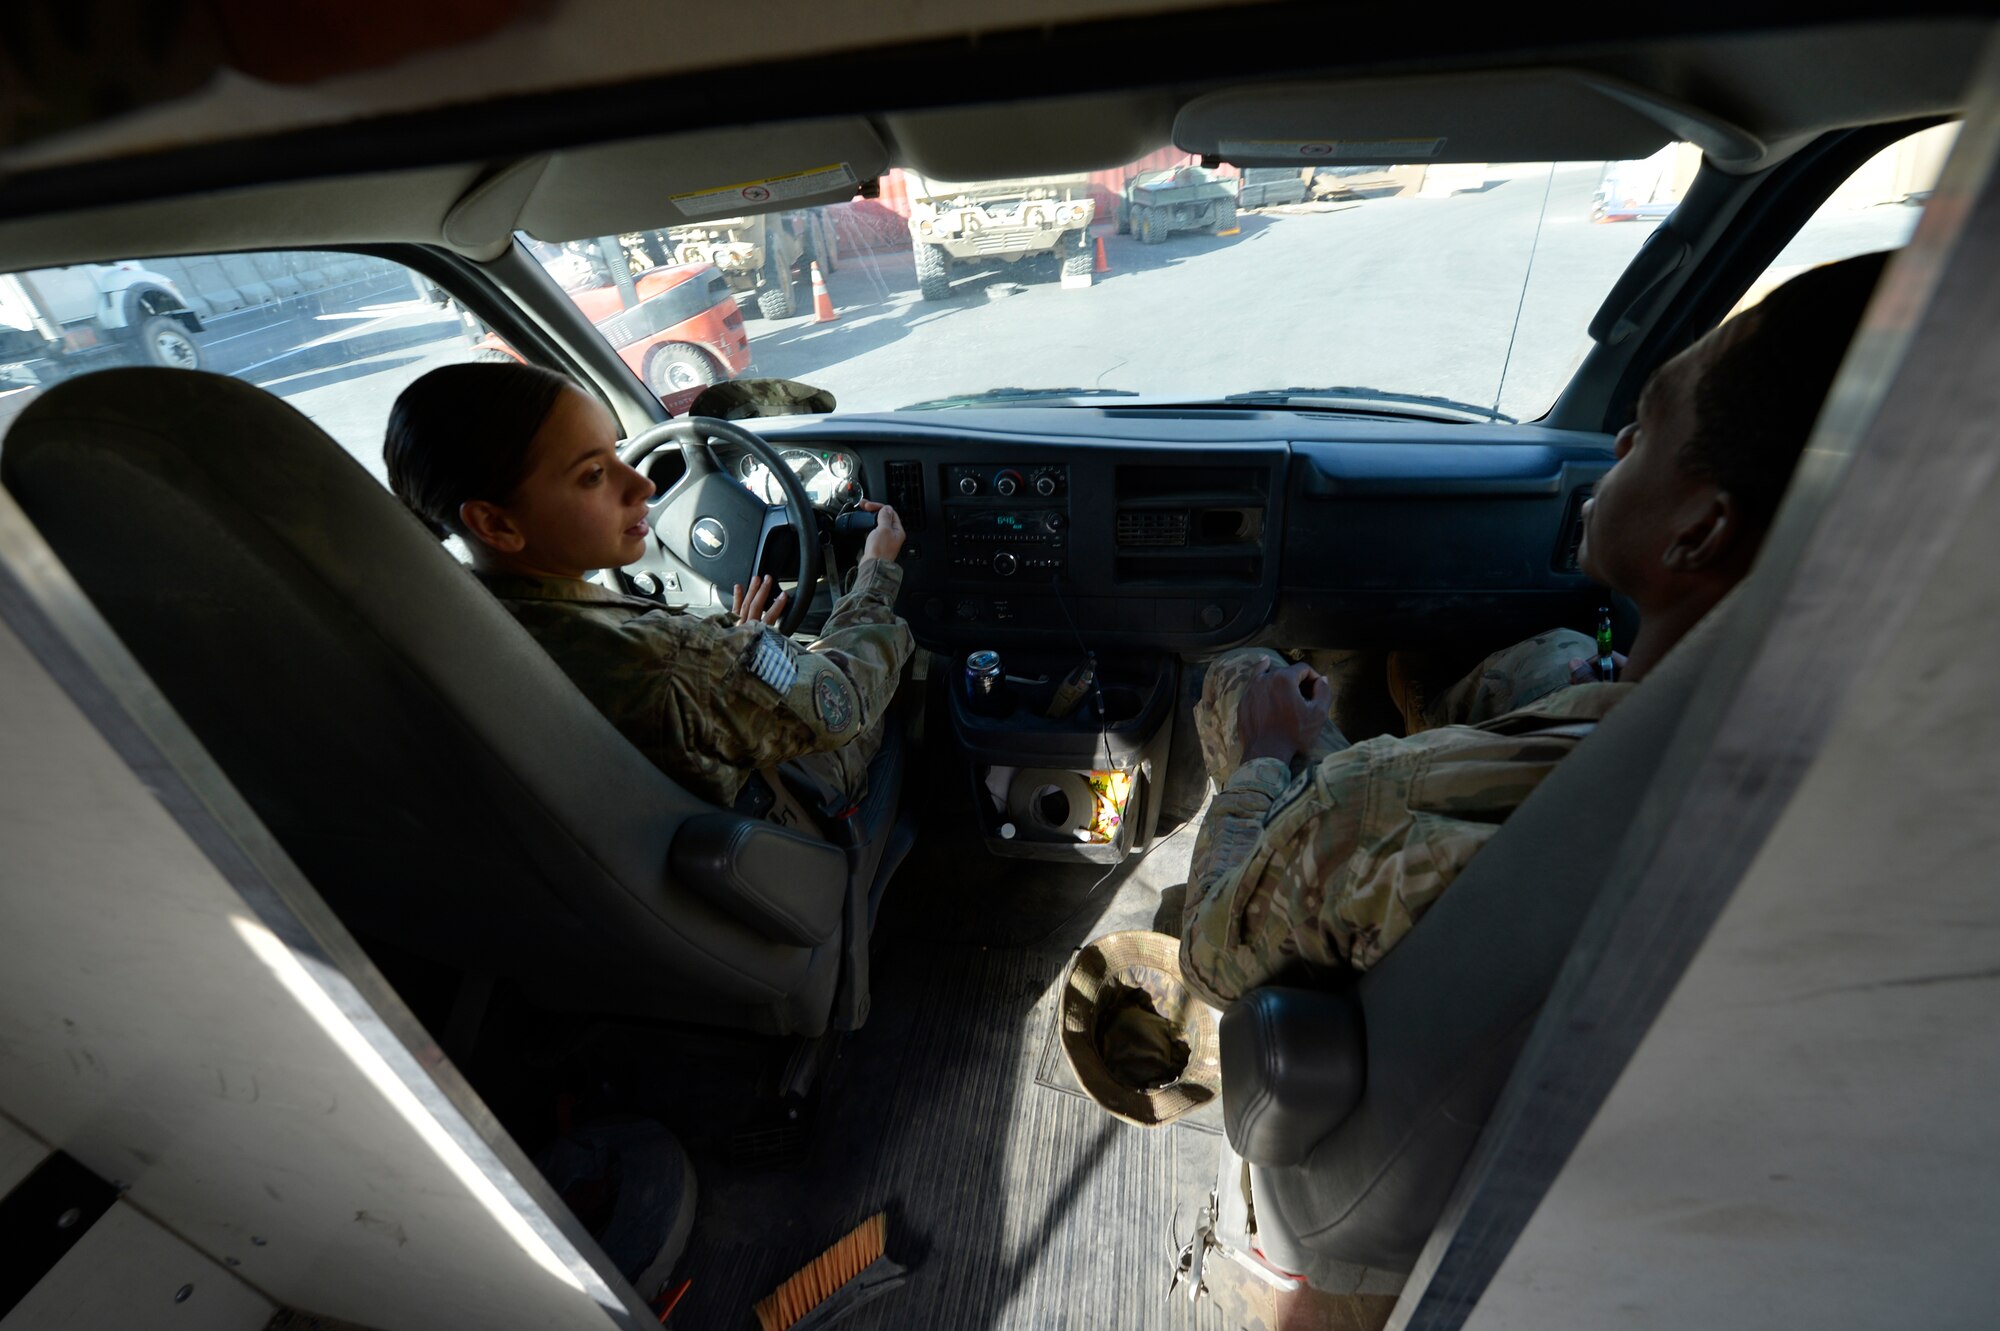 (From left) U.S. Air Force Senior Airmen Victoria Hill and Lorenza Kates, 455th Expeditionary Communications Squadron mail clerks, drive to the centralized mail location to pick mail up at Bagram Airfield, Afghanistan June 26, 2014.  Hill and Kates deliver an average of 77 pallets of mail per week.  Hill is deployed from Whiteman Air Force Base, Mo.  and a native of Blanchard, La. Kates is deployed from Davis Monthan Air Force Base, Ariz. and a native of Dublin, Ga. (U.S. Air Force photo by Staff Sgt. Evelyn Chavez/Released)